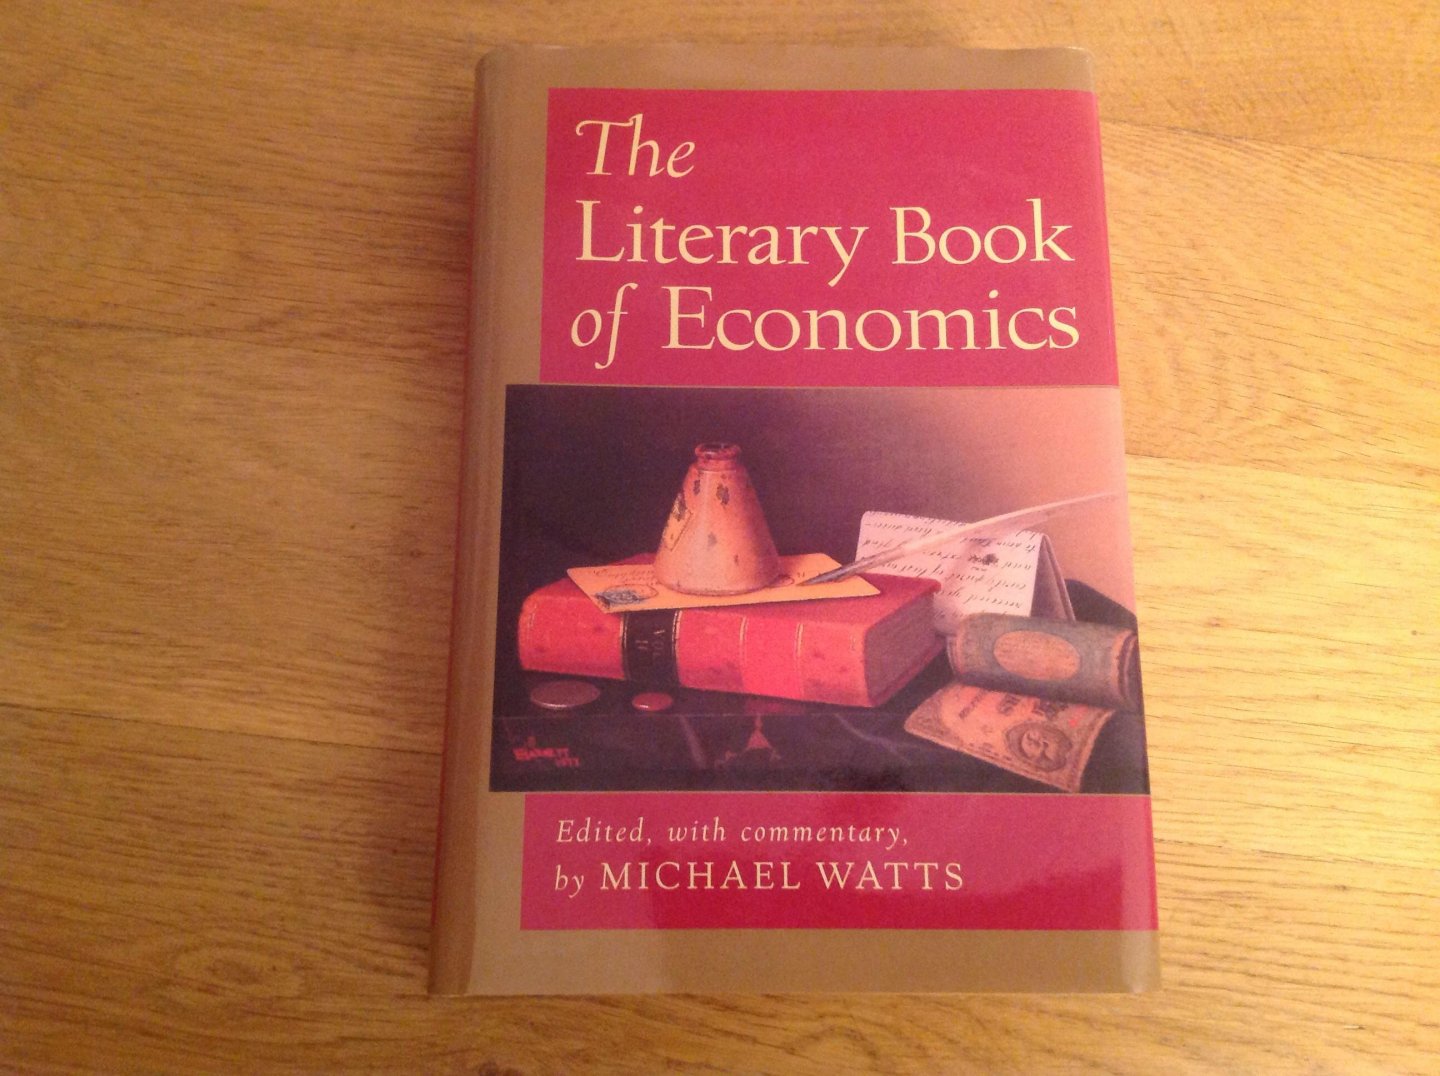 Watts, Michael - The Literary Book of Economics / Including Readings from Literature and Drama on Economic Concepts, Issues, and Themes